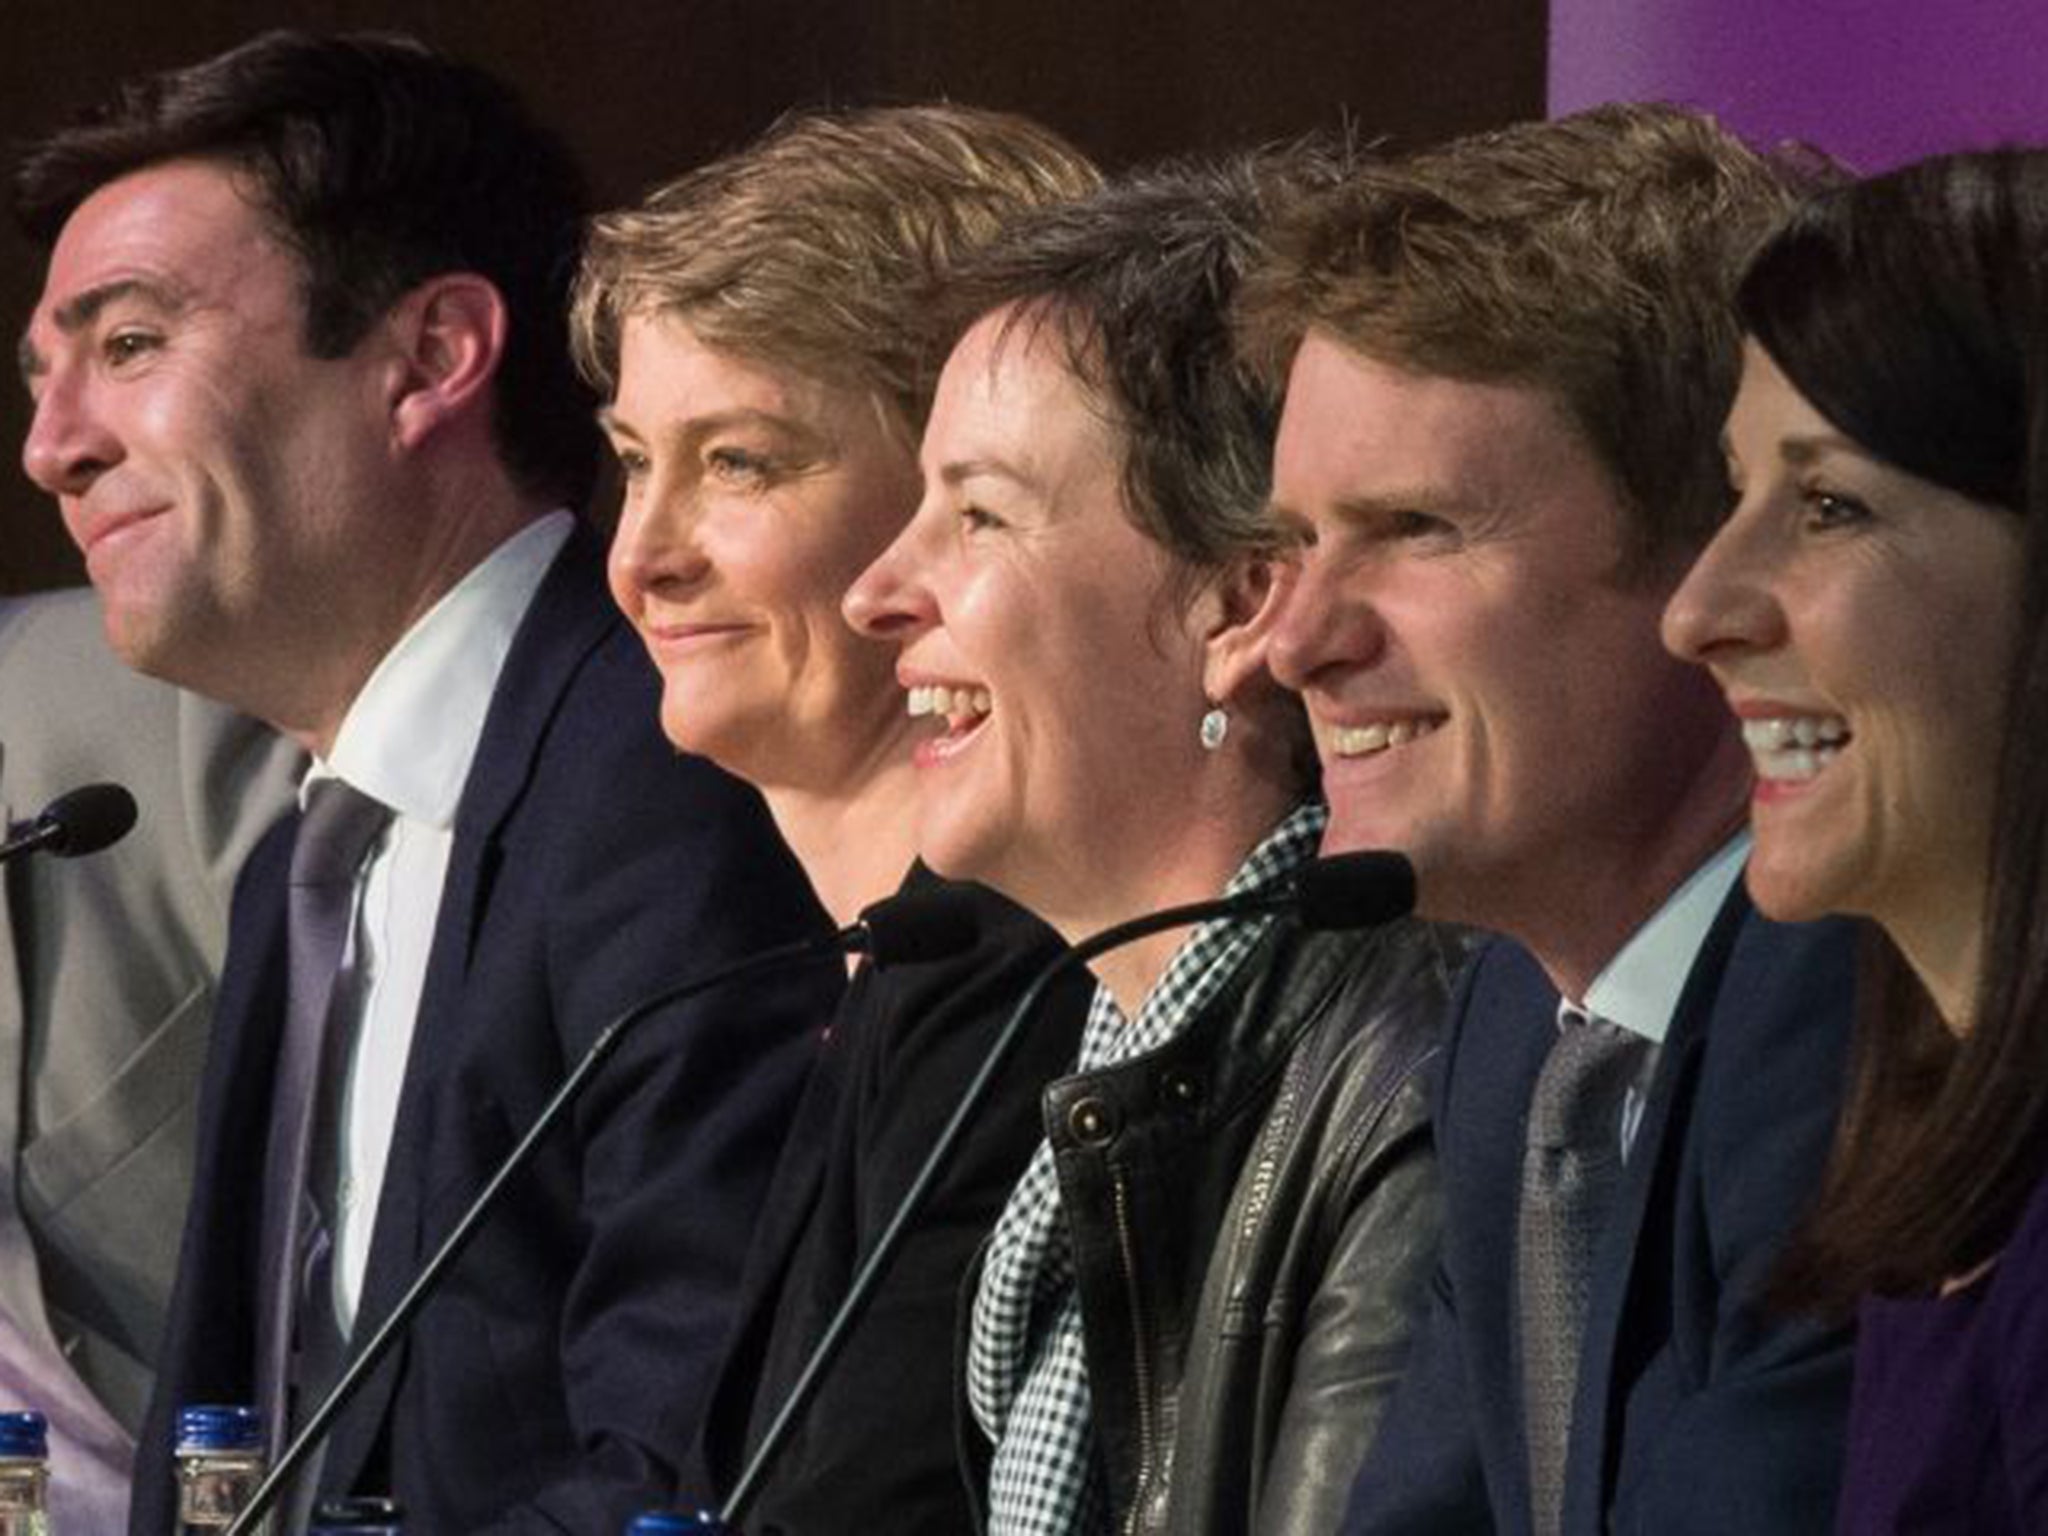 The Labour leadership contenders spoke about the future of the party at a Progress event last weekend